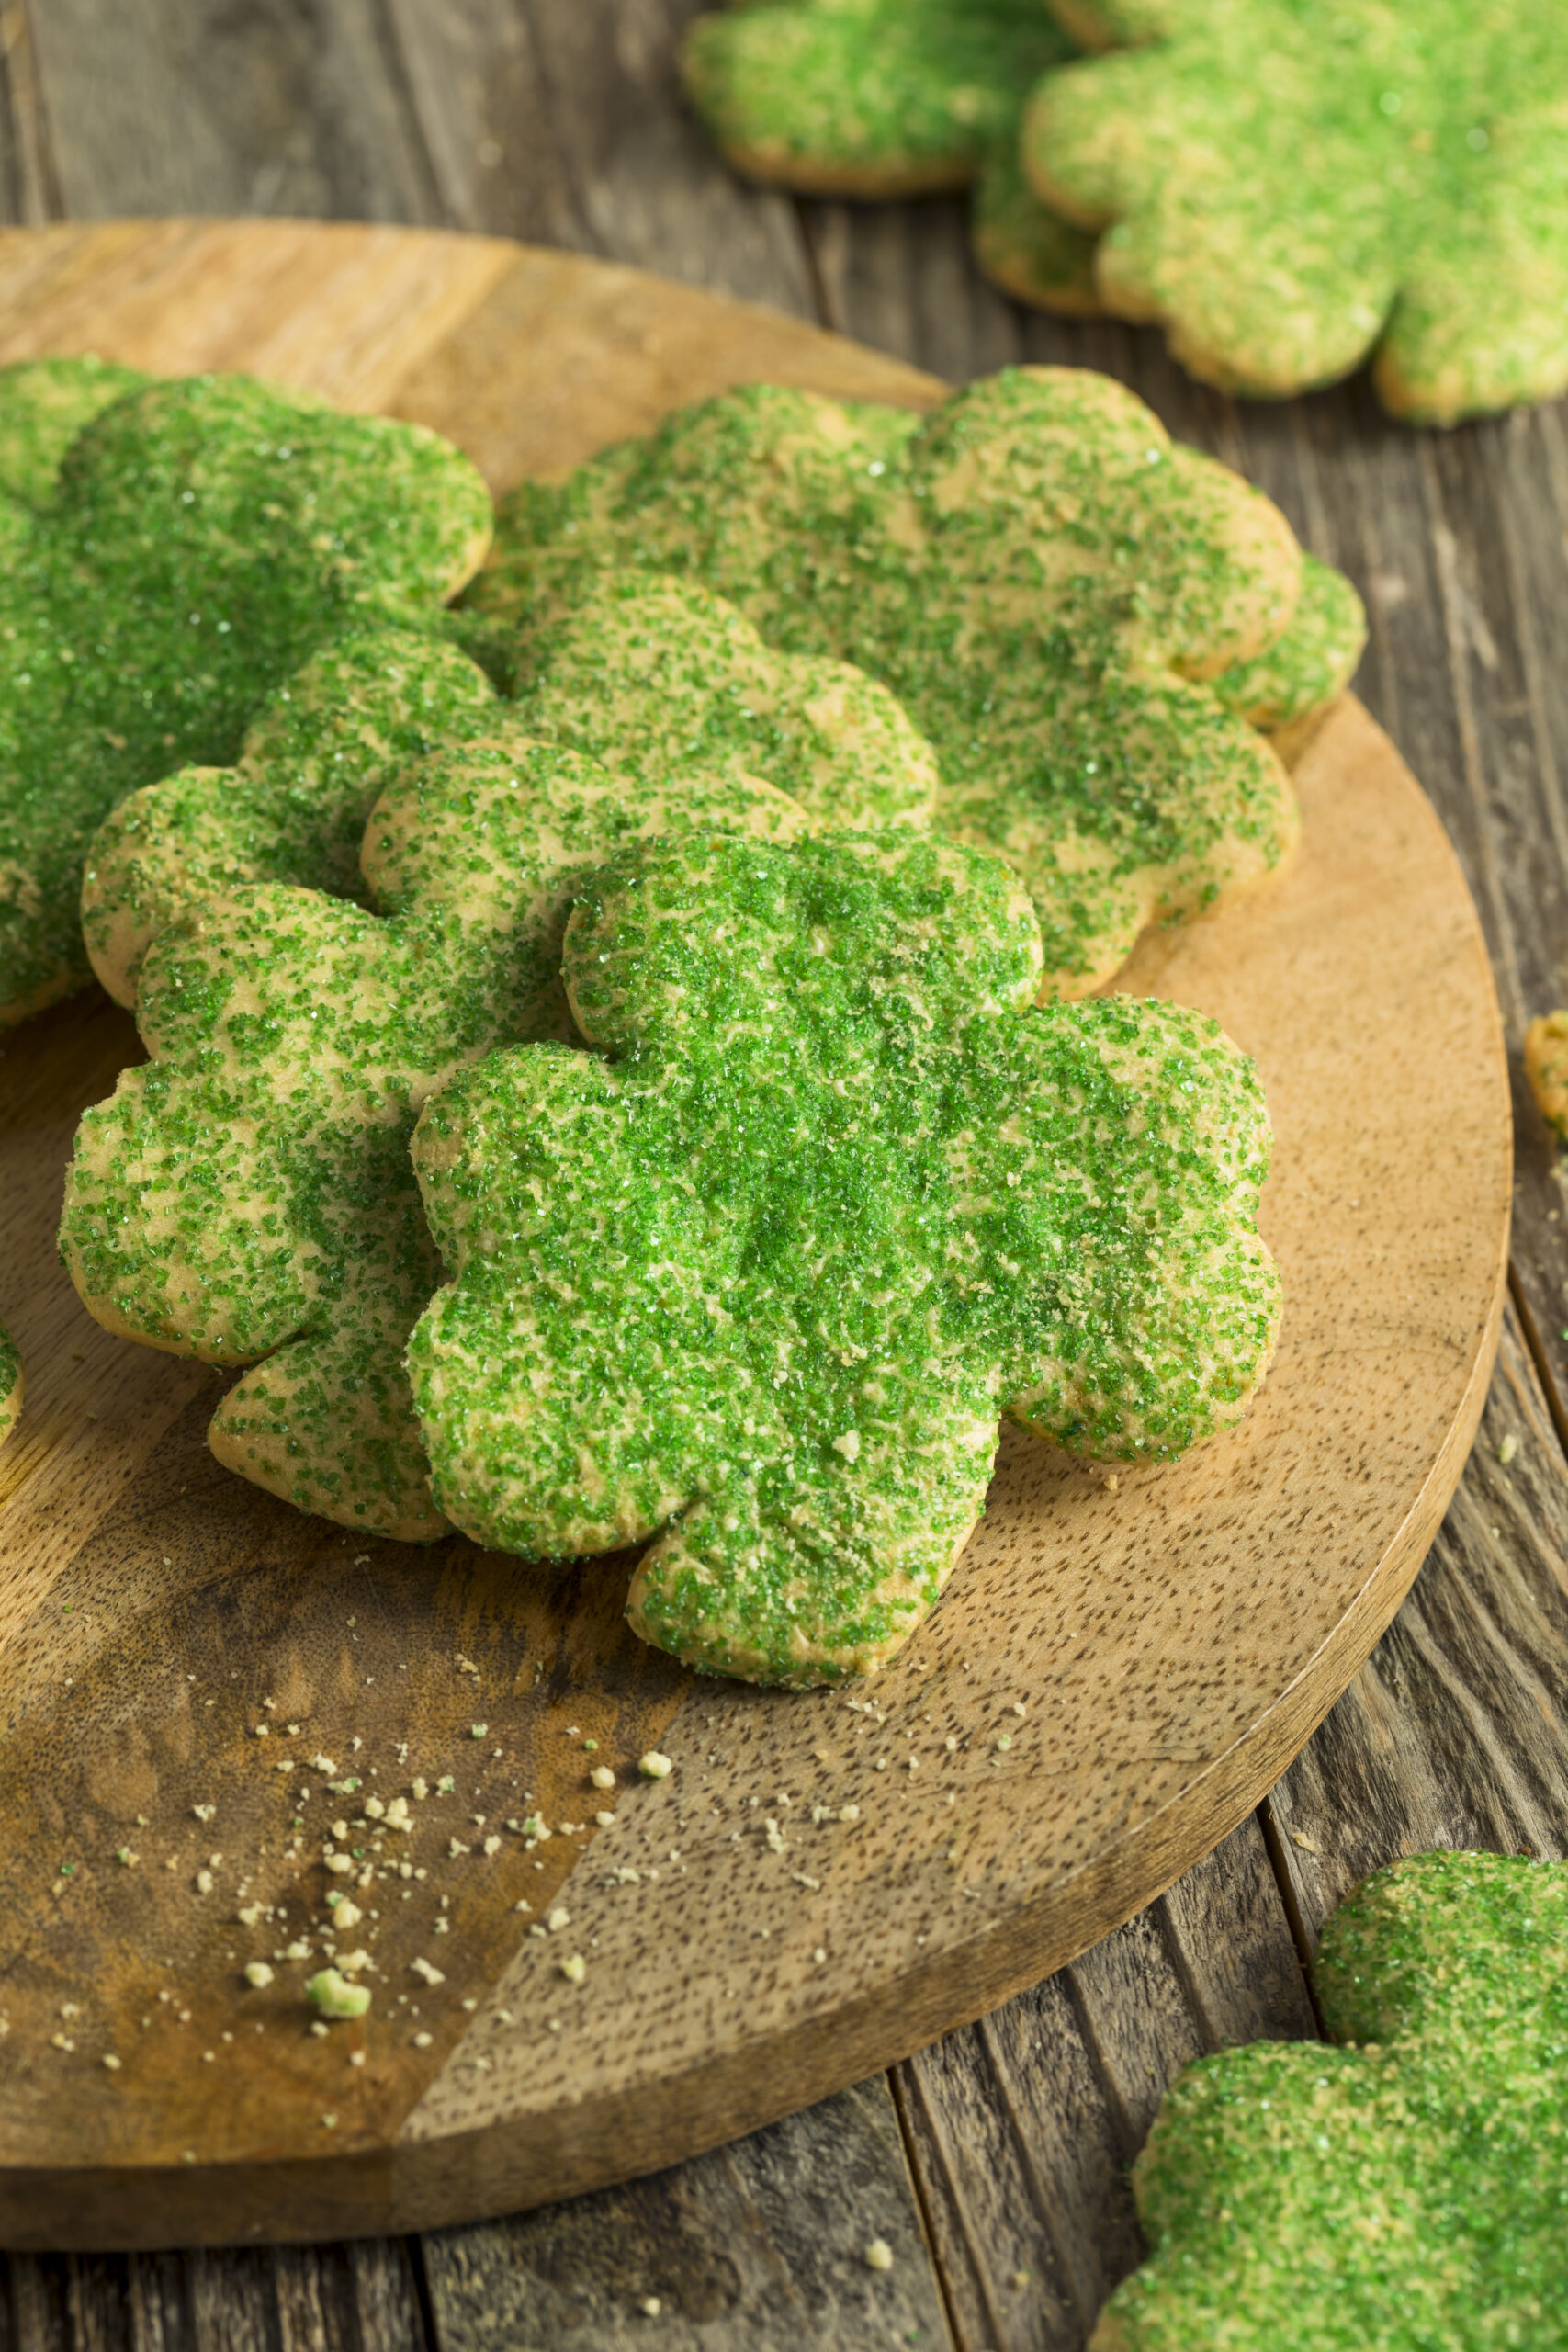 Homemade Green Shamrock Cookies for St Patricks Day - Top 10 St. Patrick's Day Dessert Recipes; St. Patrick's day recipes for desserts along with other green recipes for this Irish holiday!